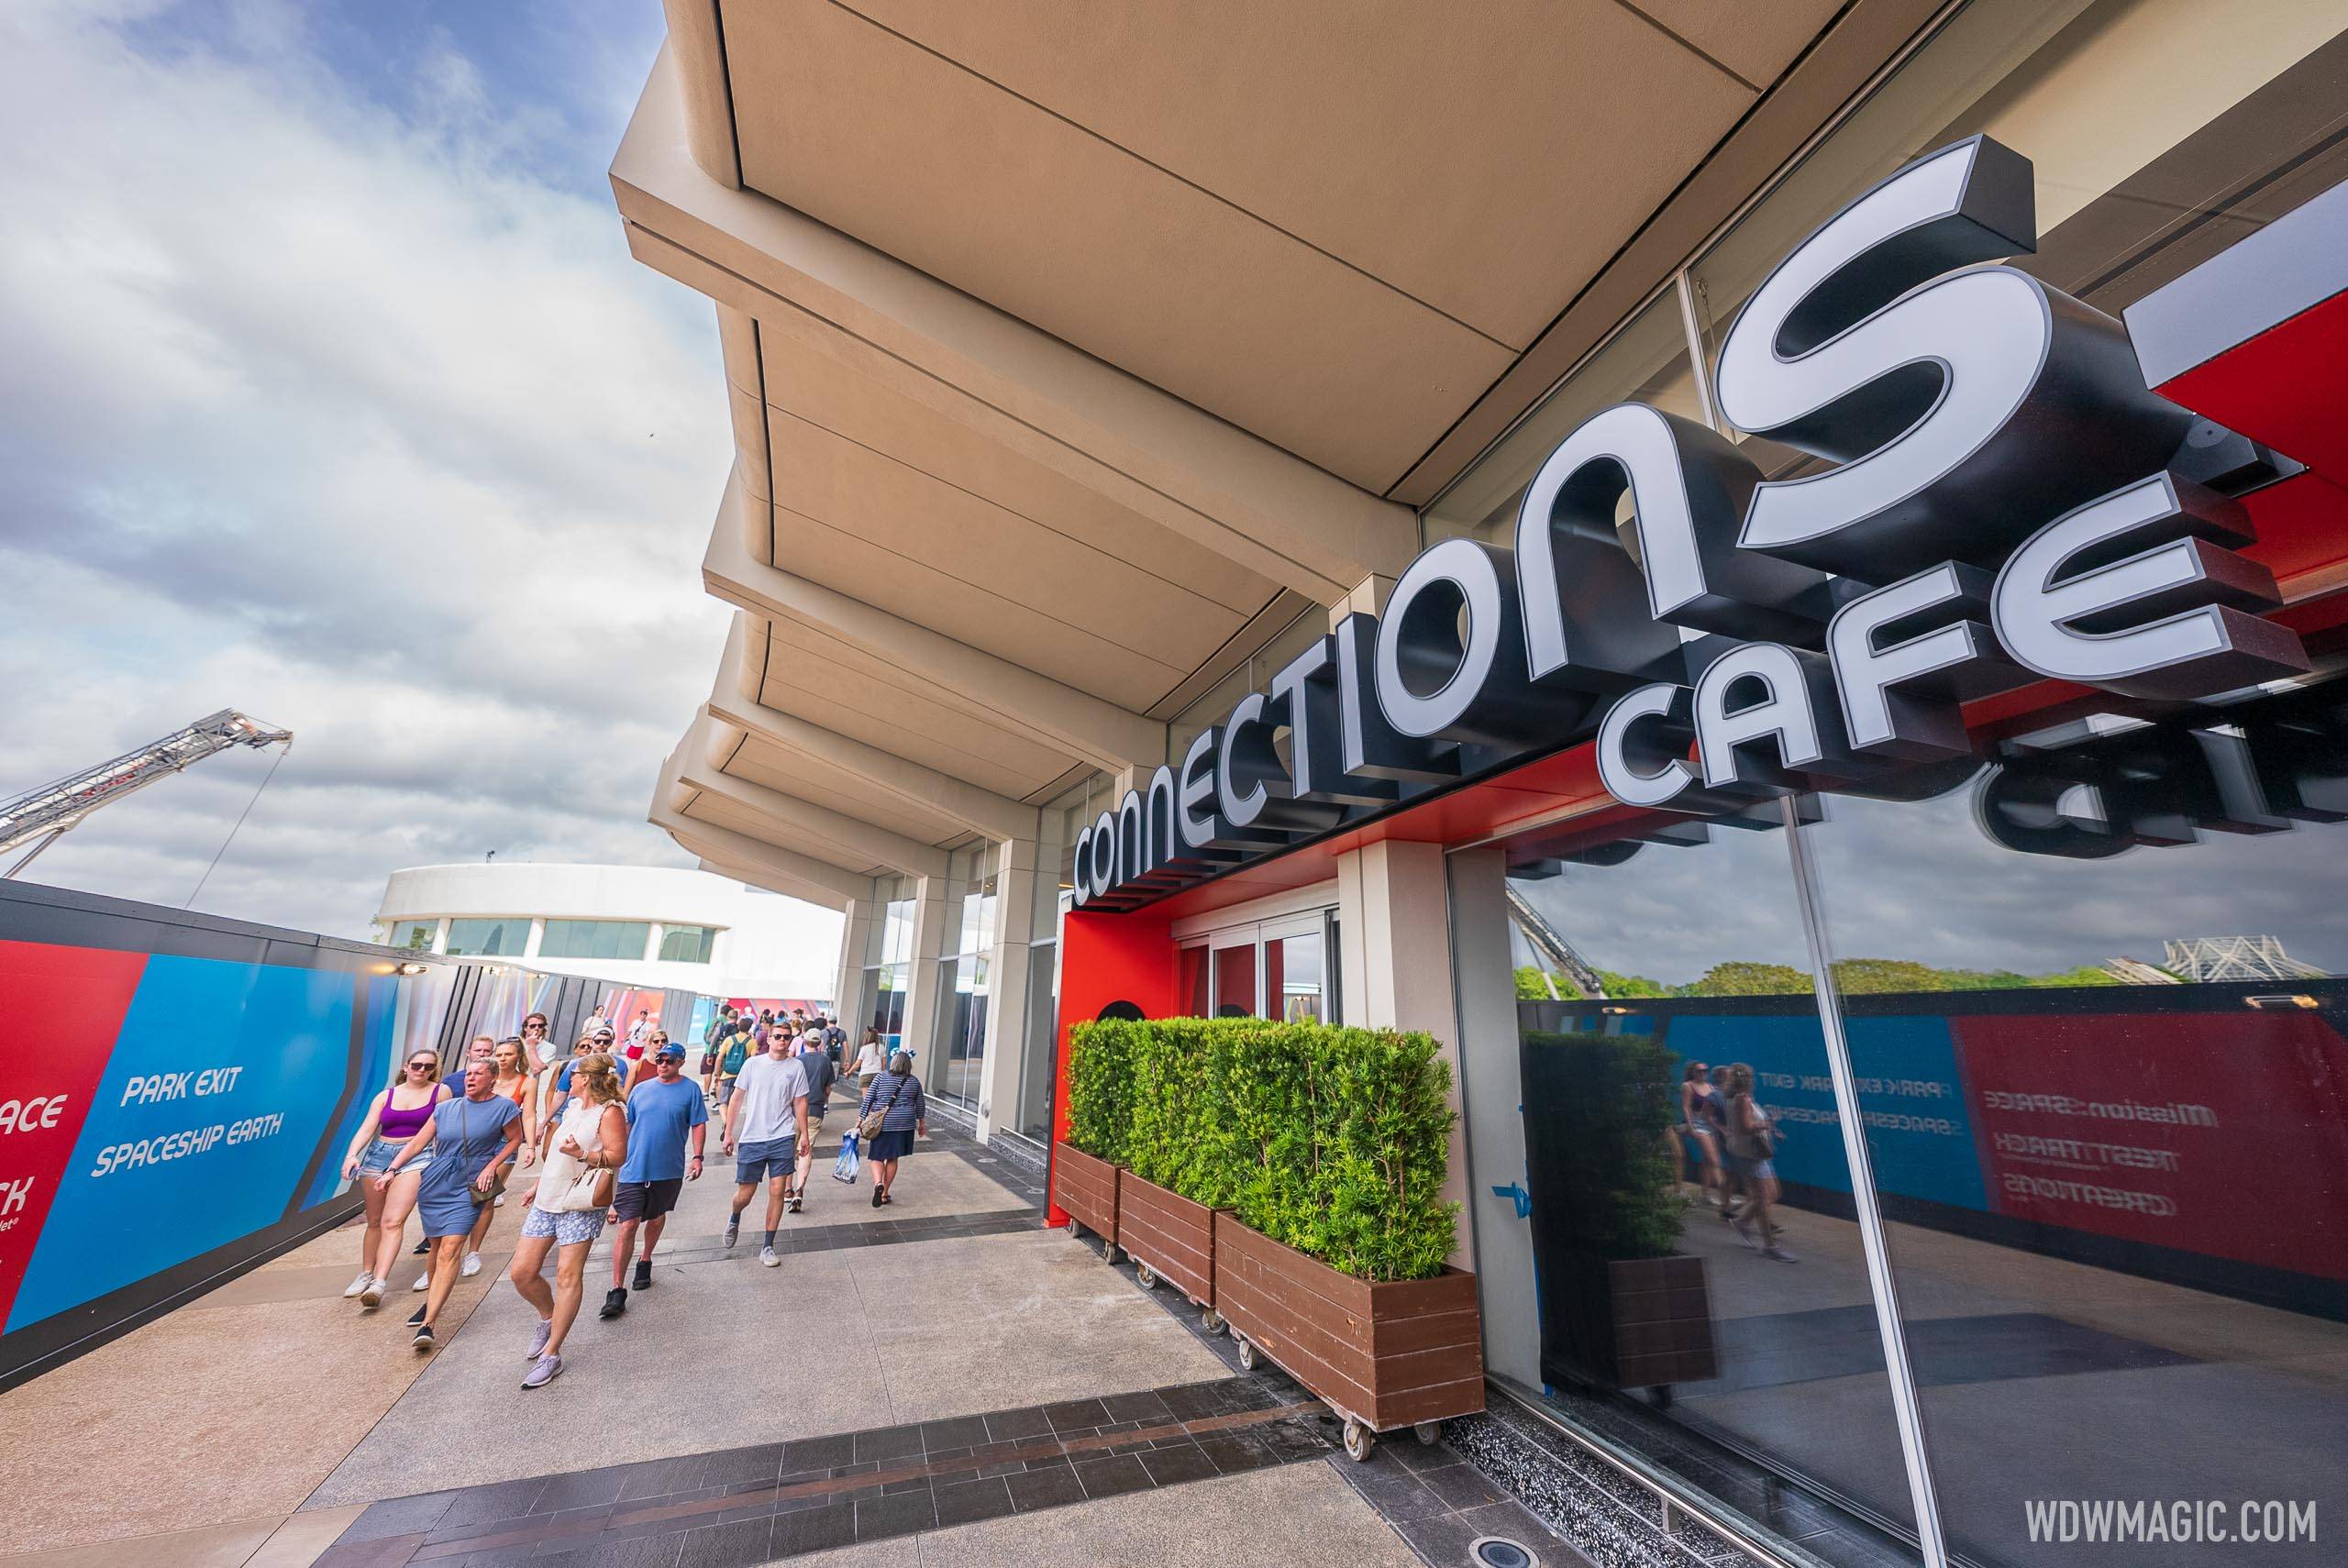 New walkway through World Celebration opens at EPCOT ahead of Connections Cafe's upcoming opening